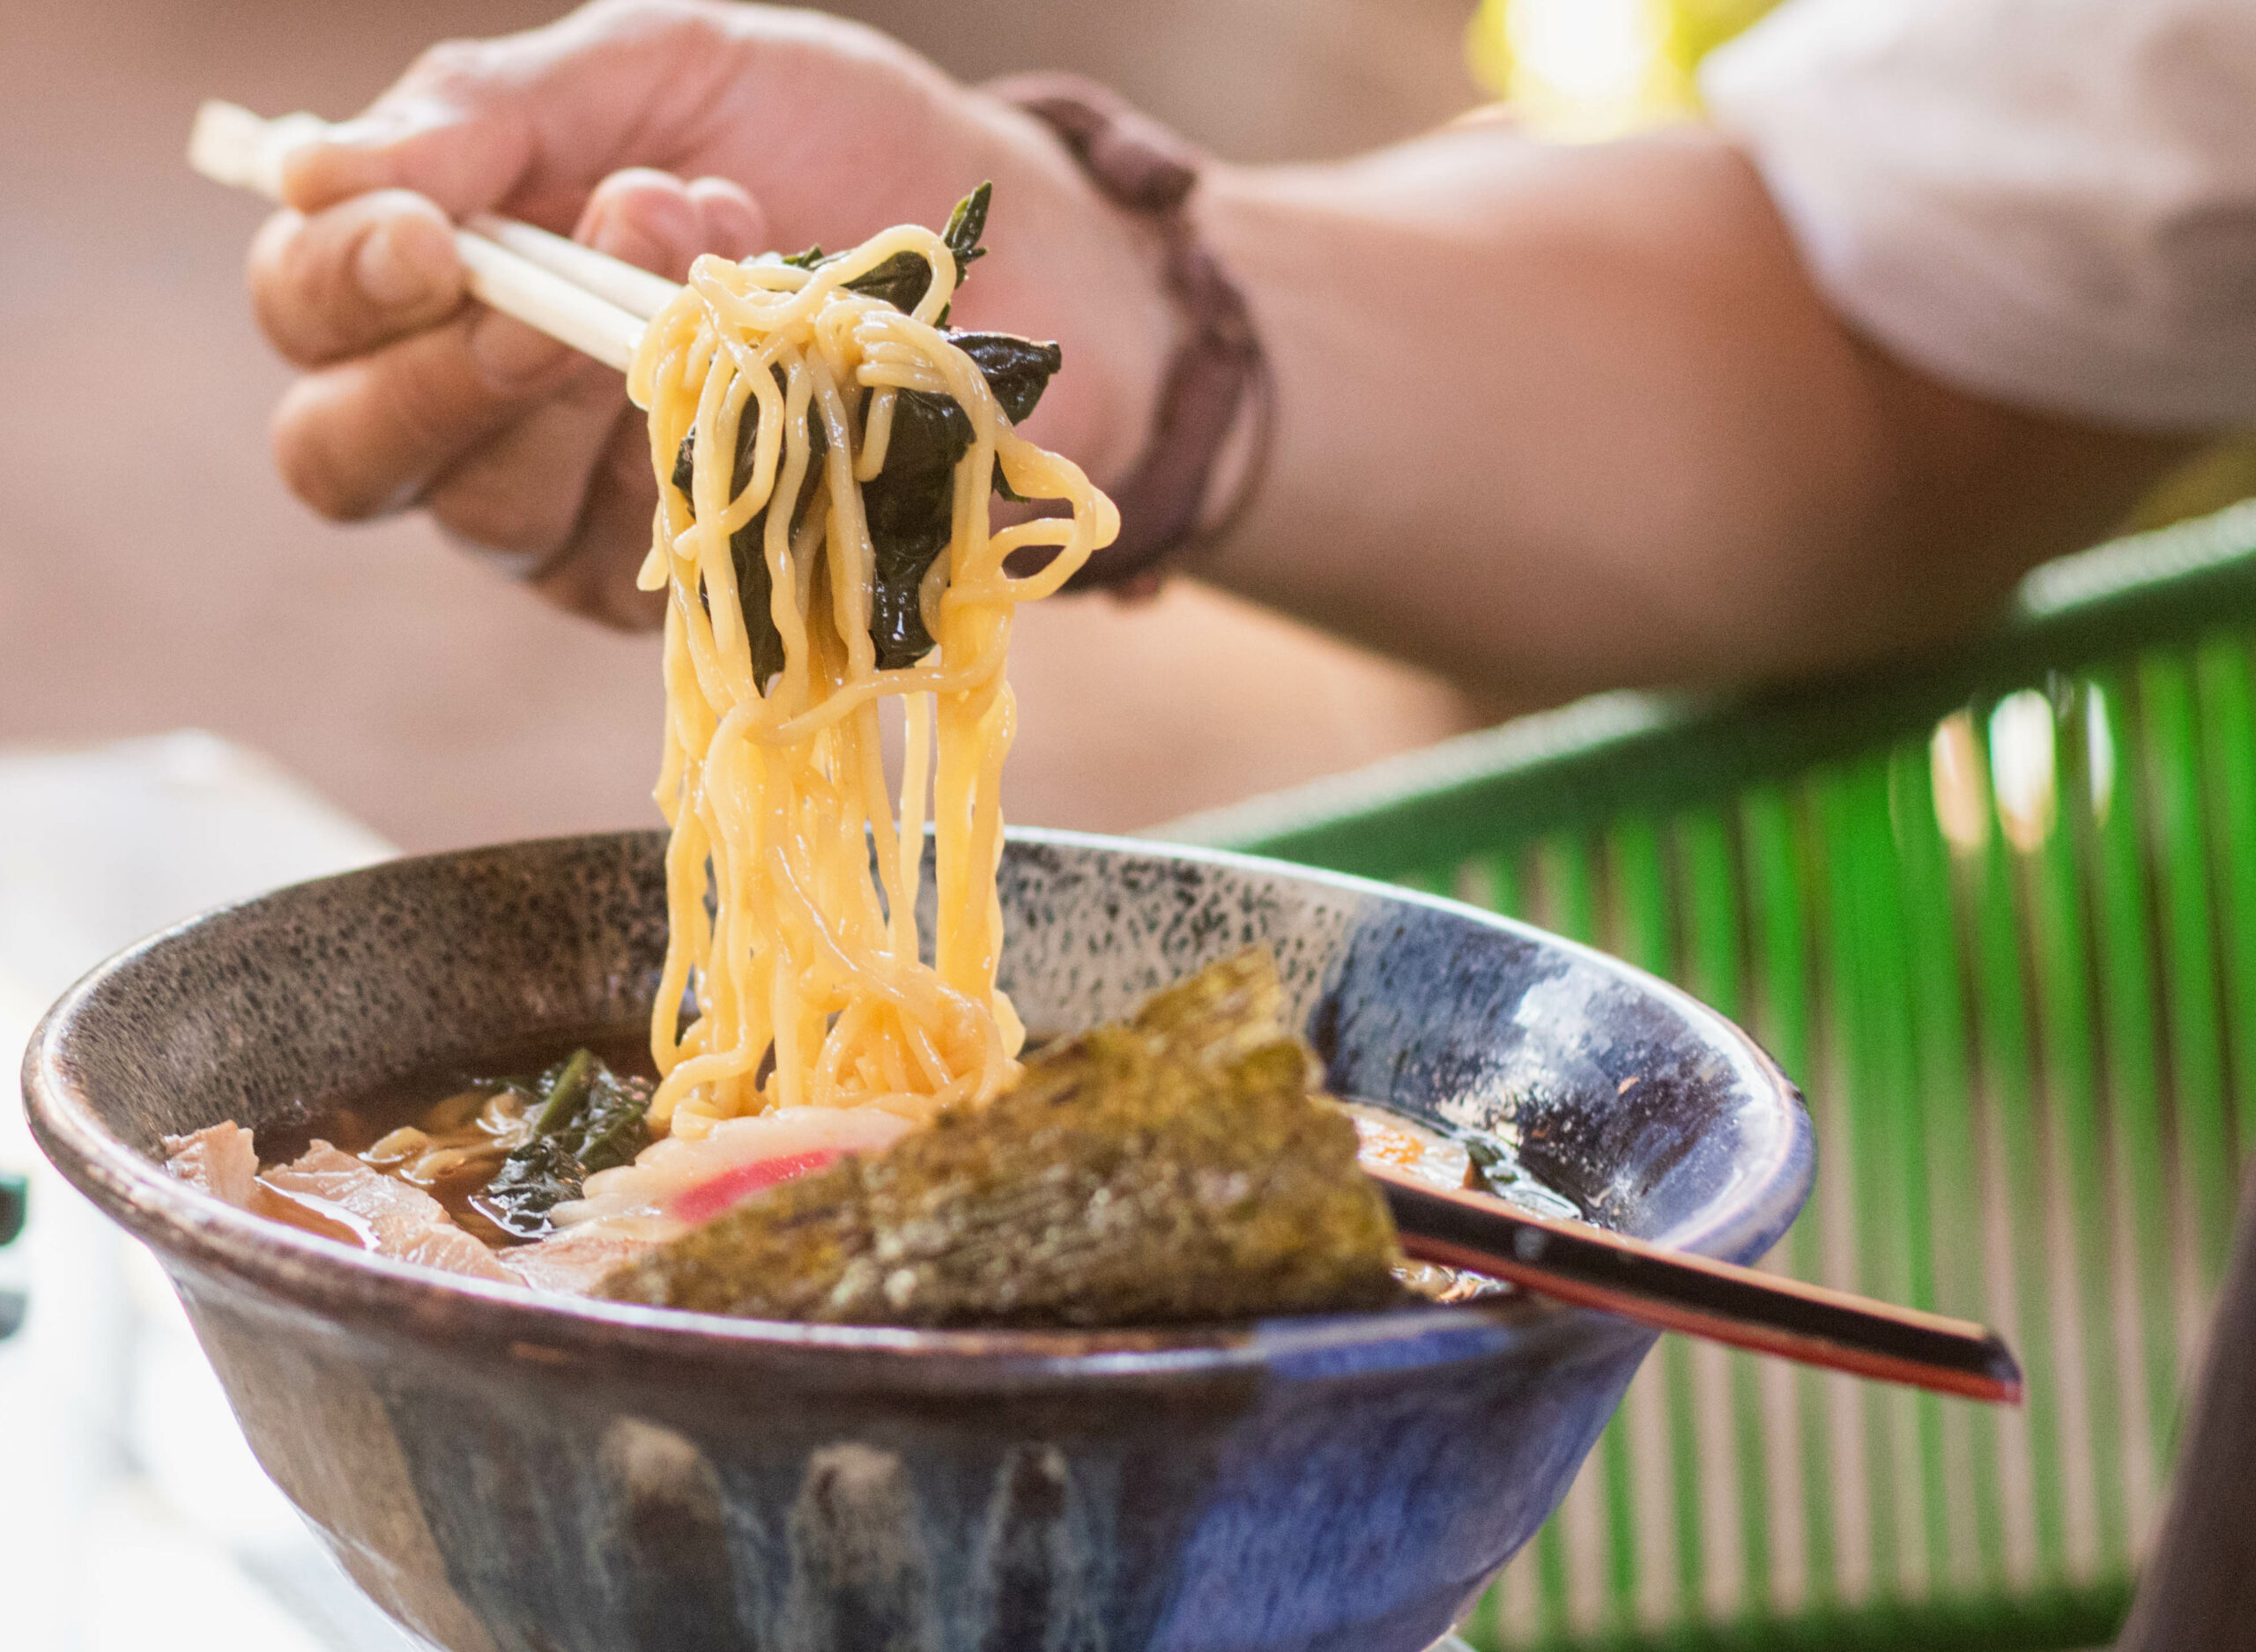 Japanese Ramen Making Class with Ingredients Kit Delivered Online